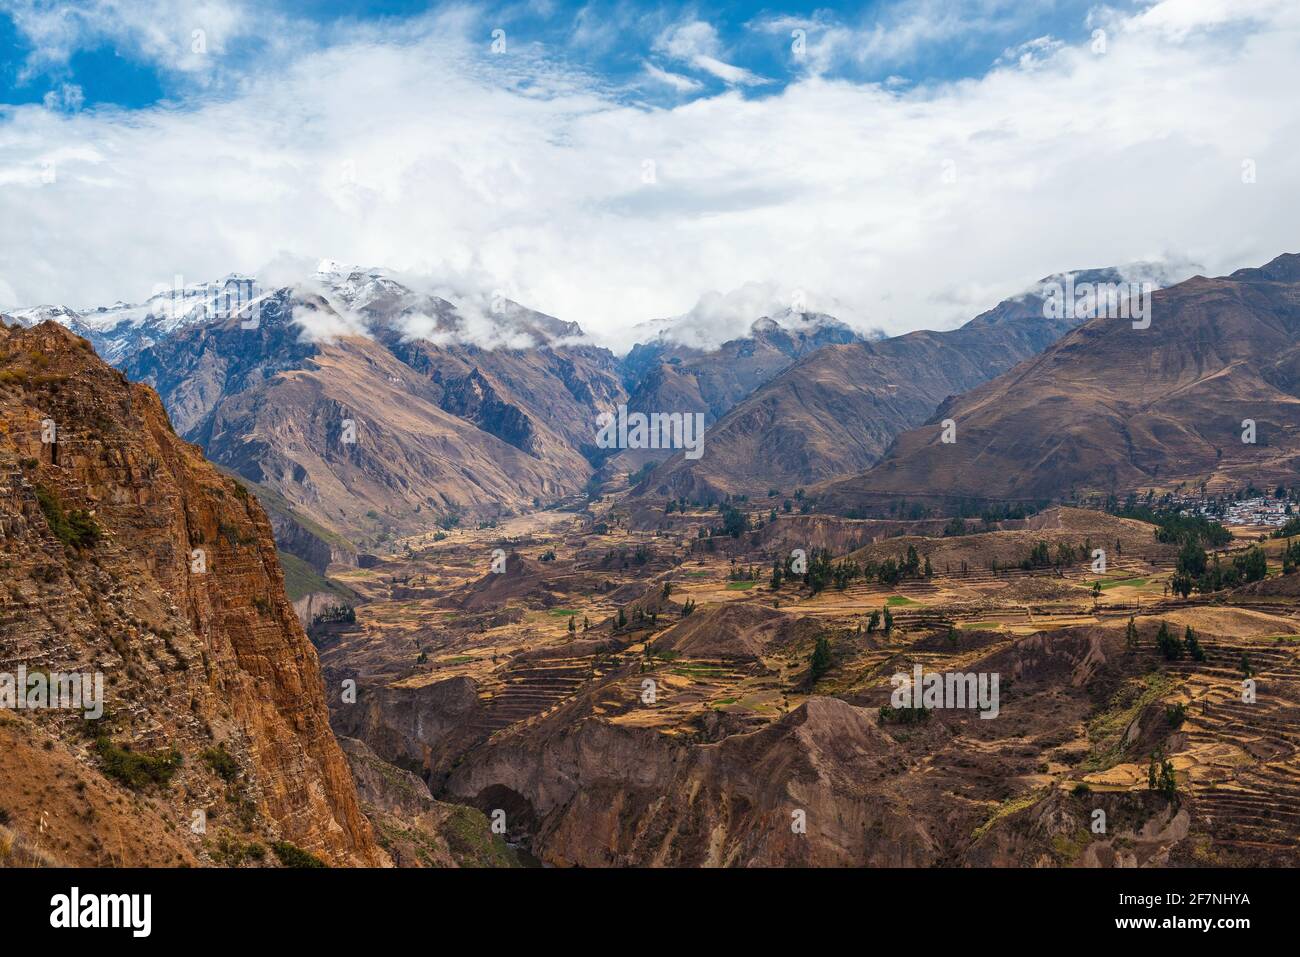 Colca Canyon landscape with snowcapped Andes peaks, Arequipa, Peru. Stock Photo